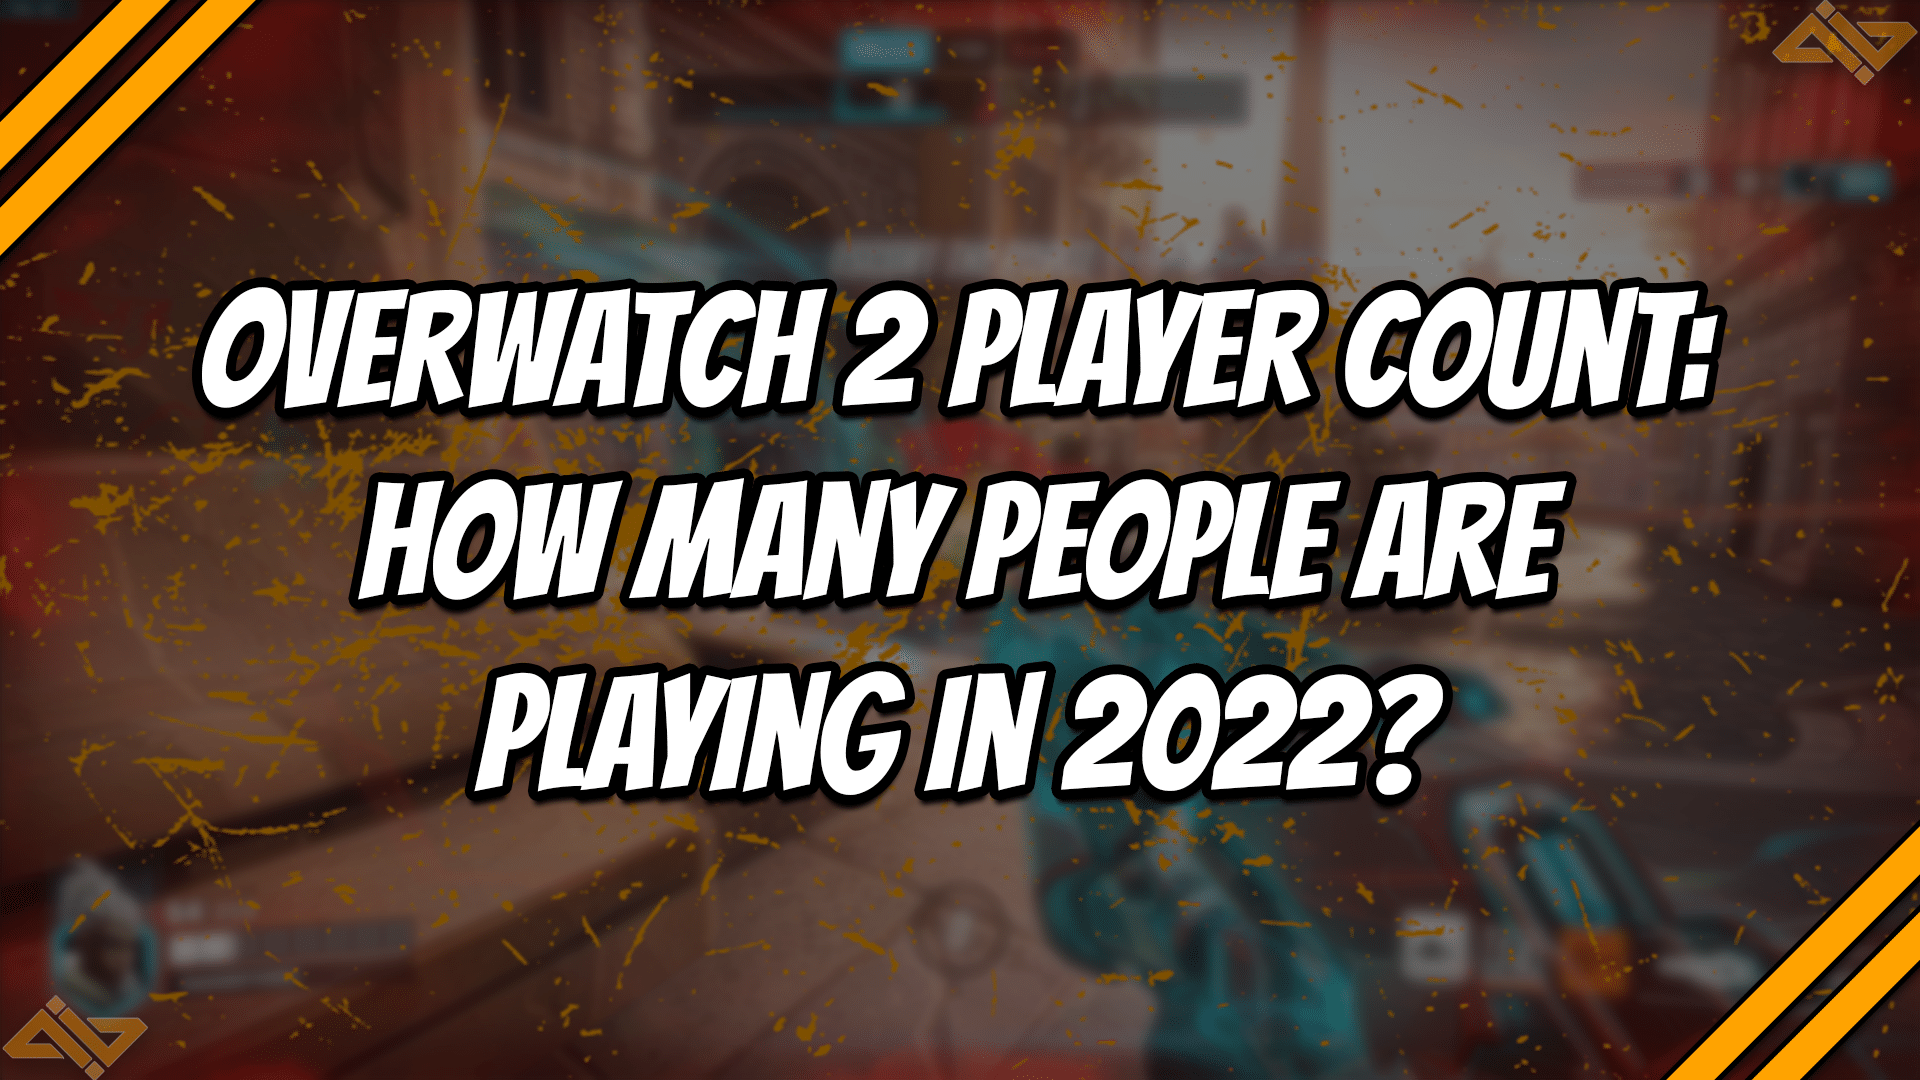 Overwatch 2 Player Count How Many People Are Playing in 2022 over Sojourn gameplay